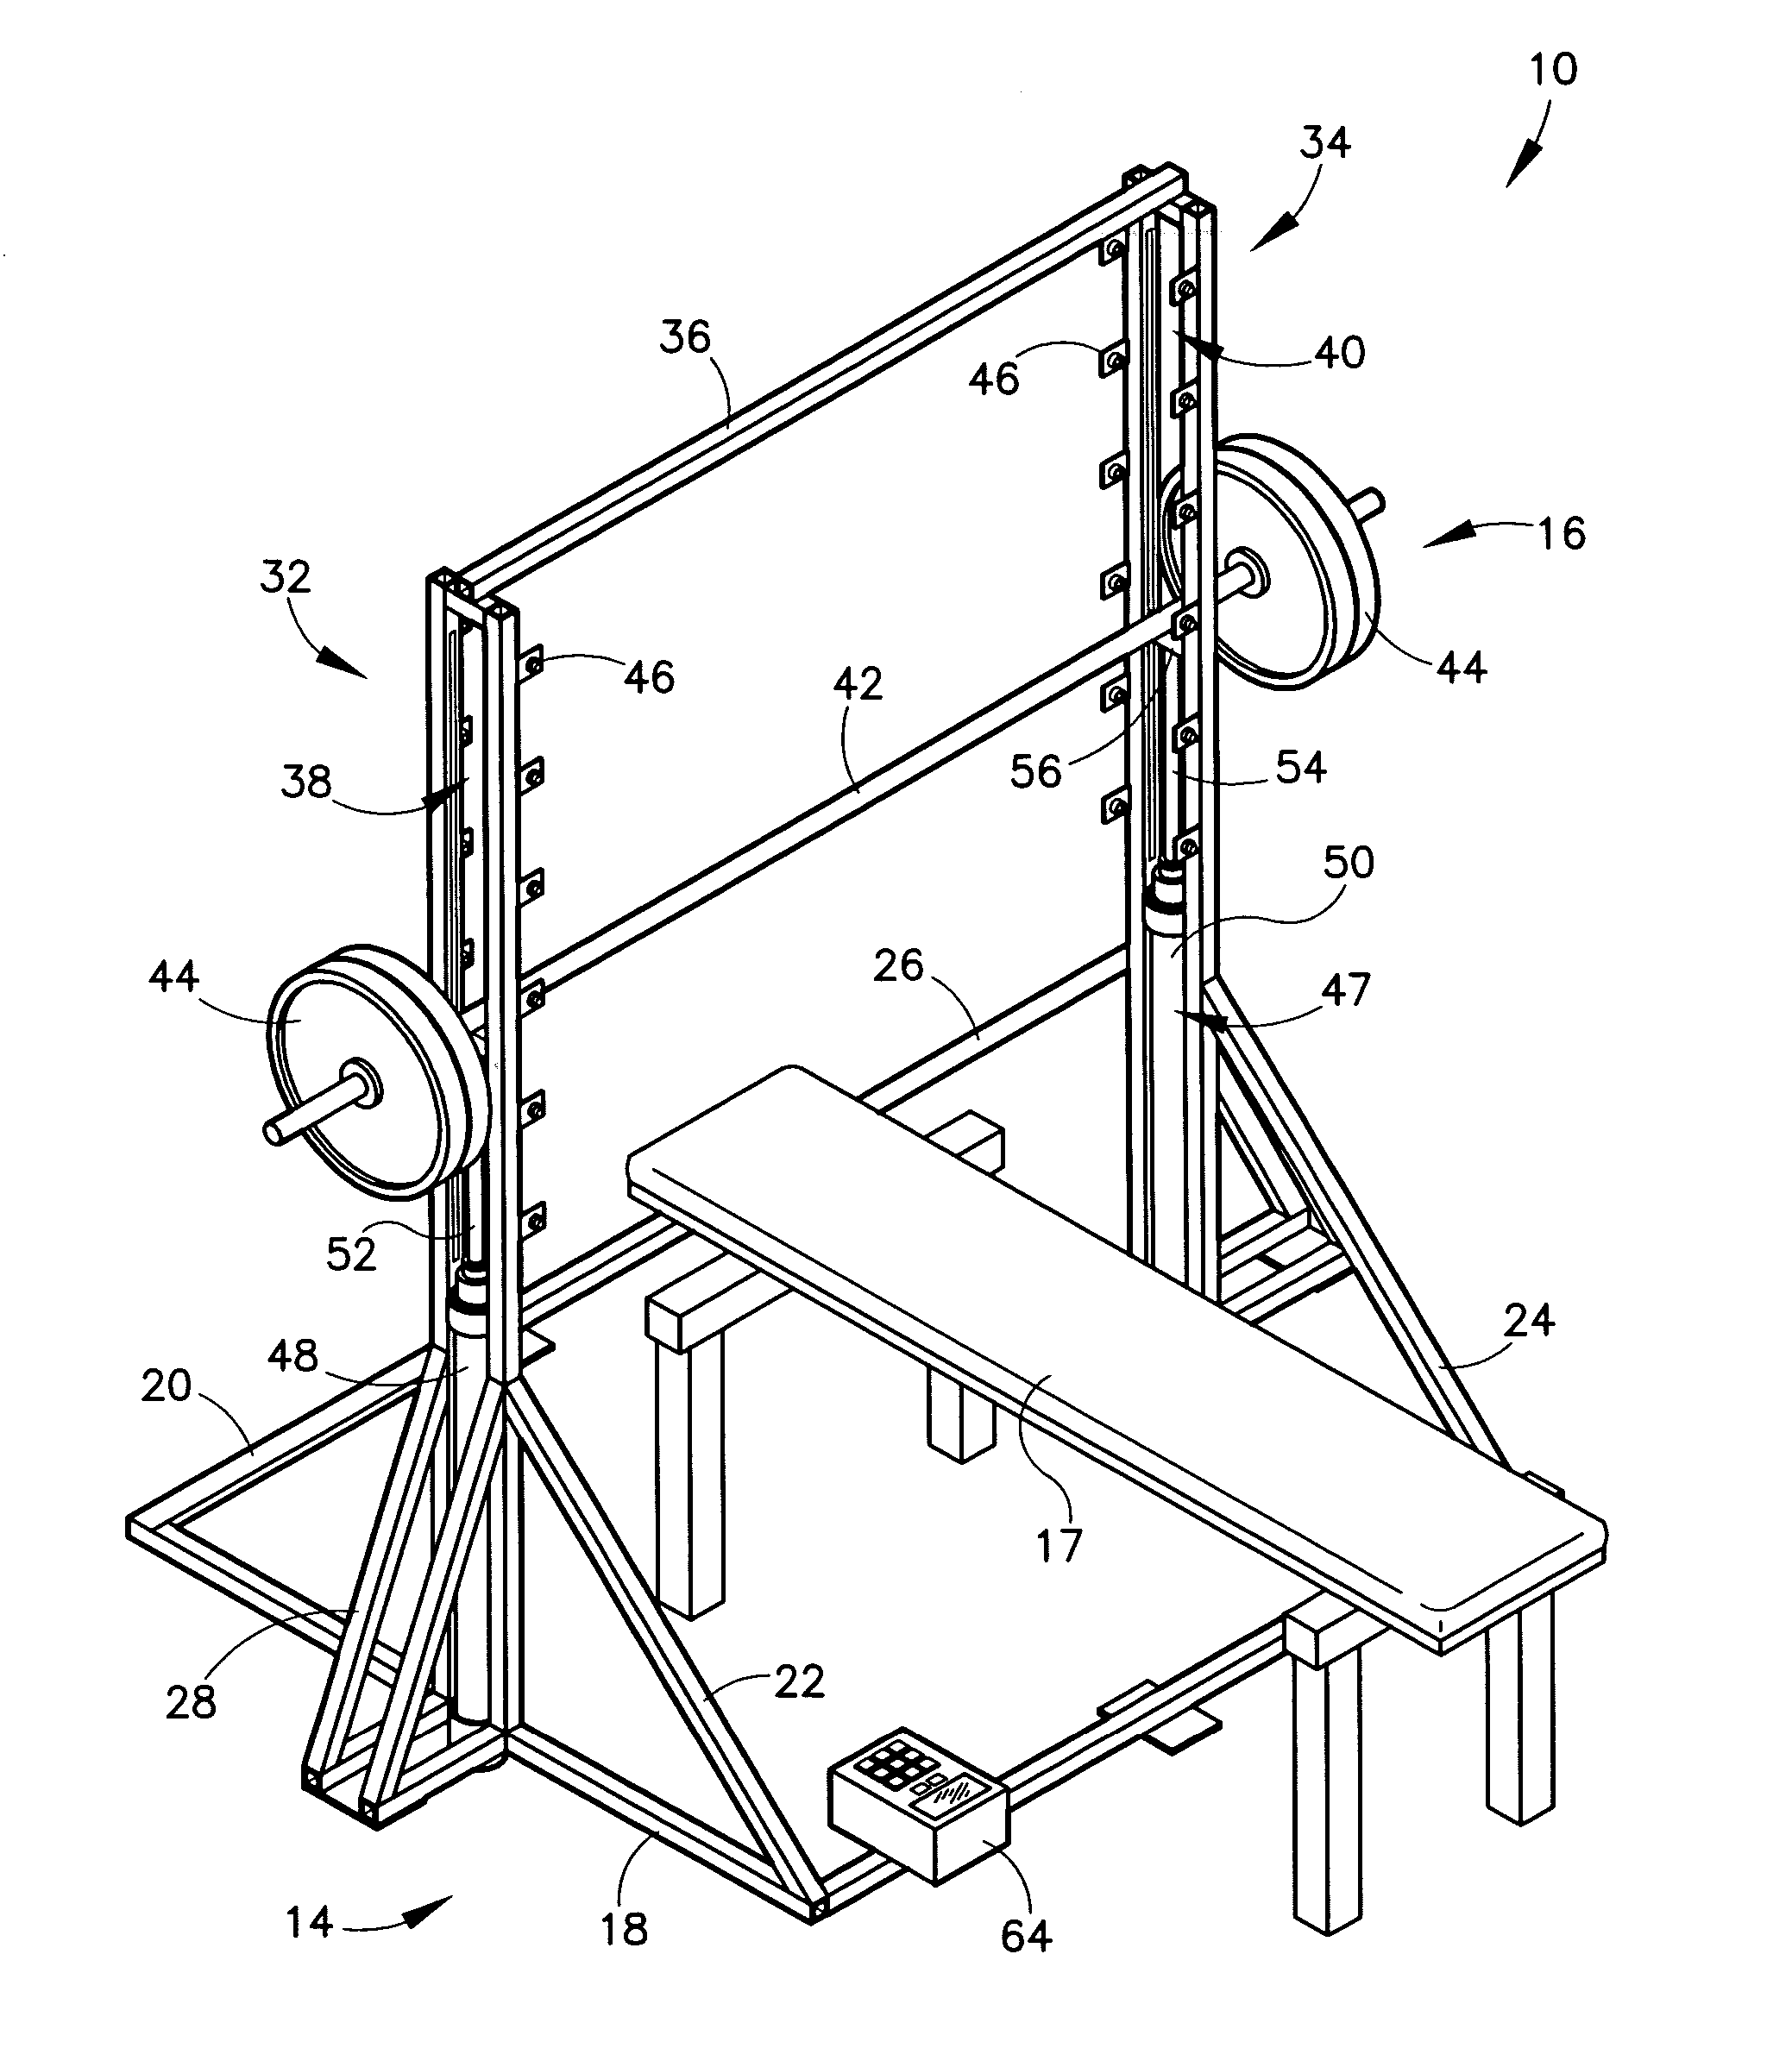 Apparatus and method for facilitating the safe lifting of free weights